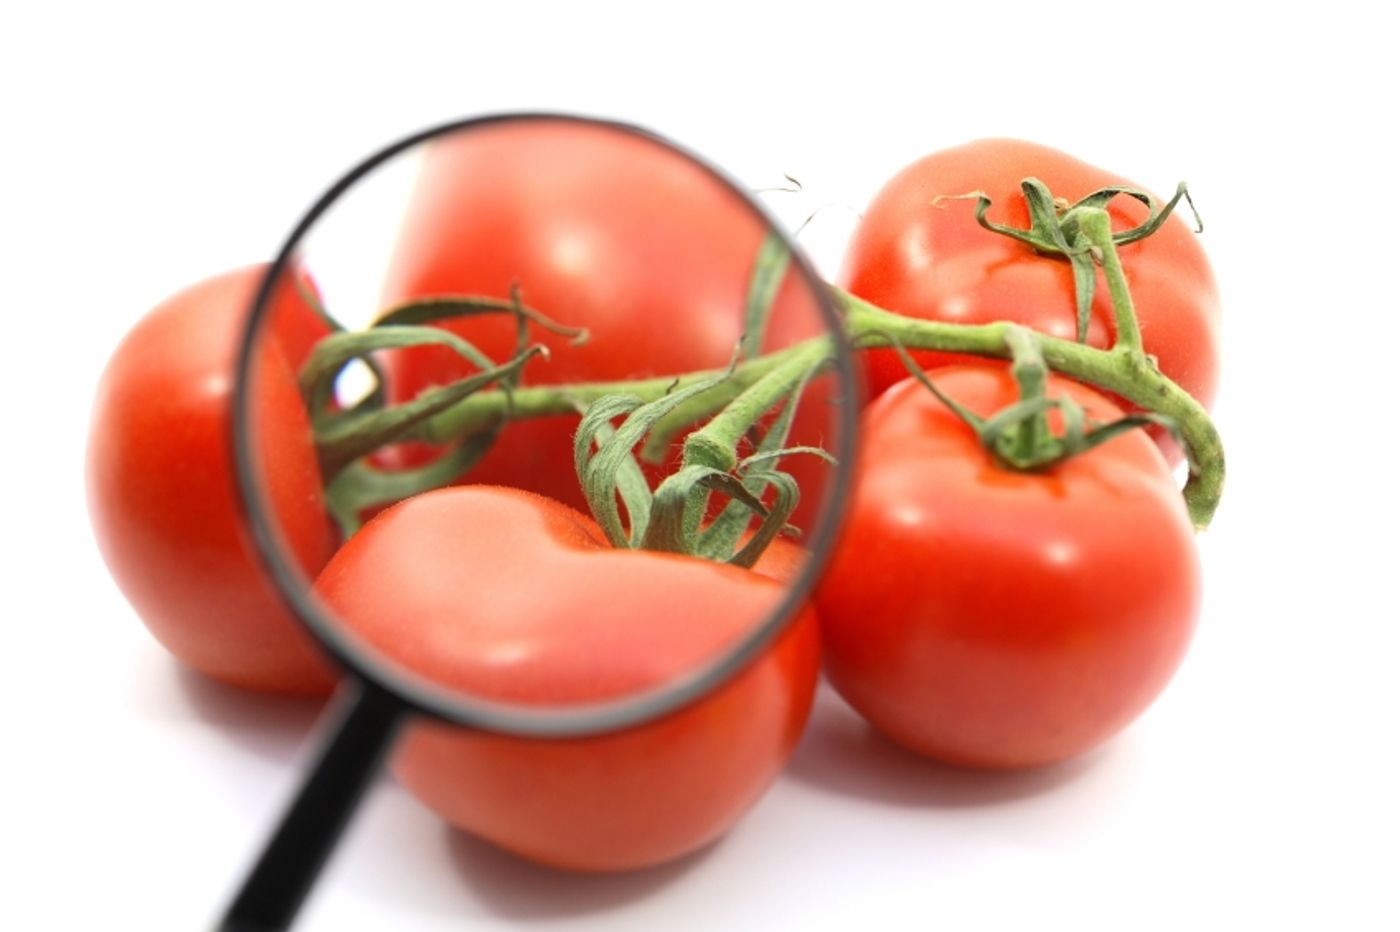 Tomatoes grown on the Virginia Eastern Shore have been attributed to multiple Salmonella outbreaks.